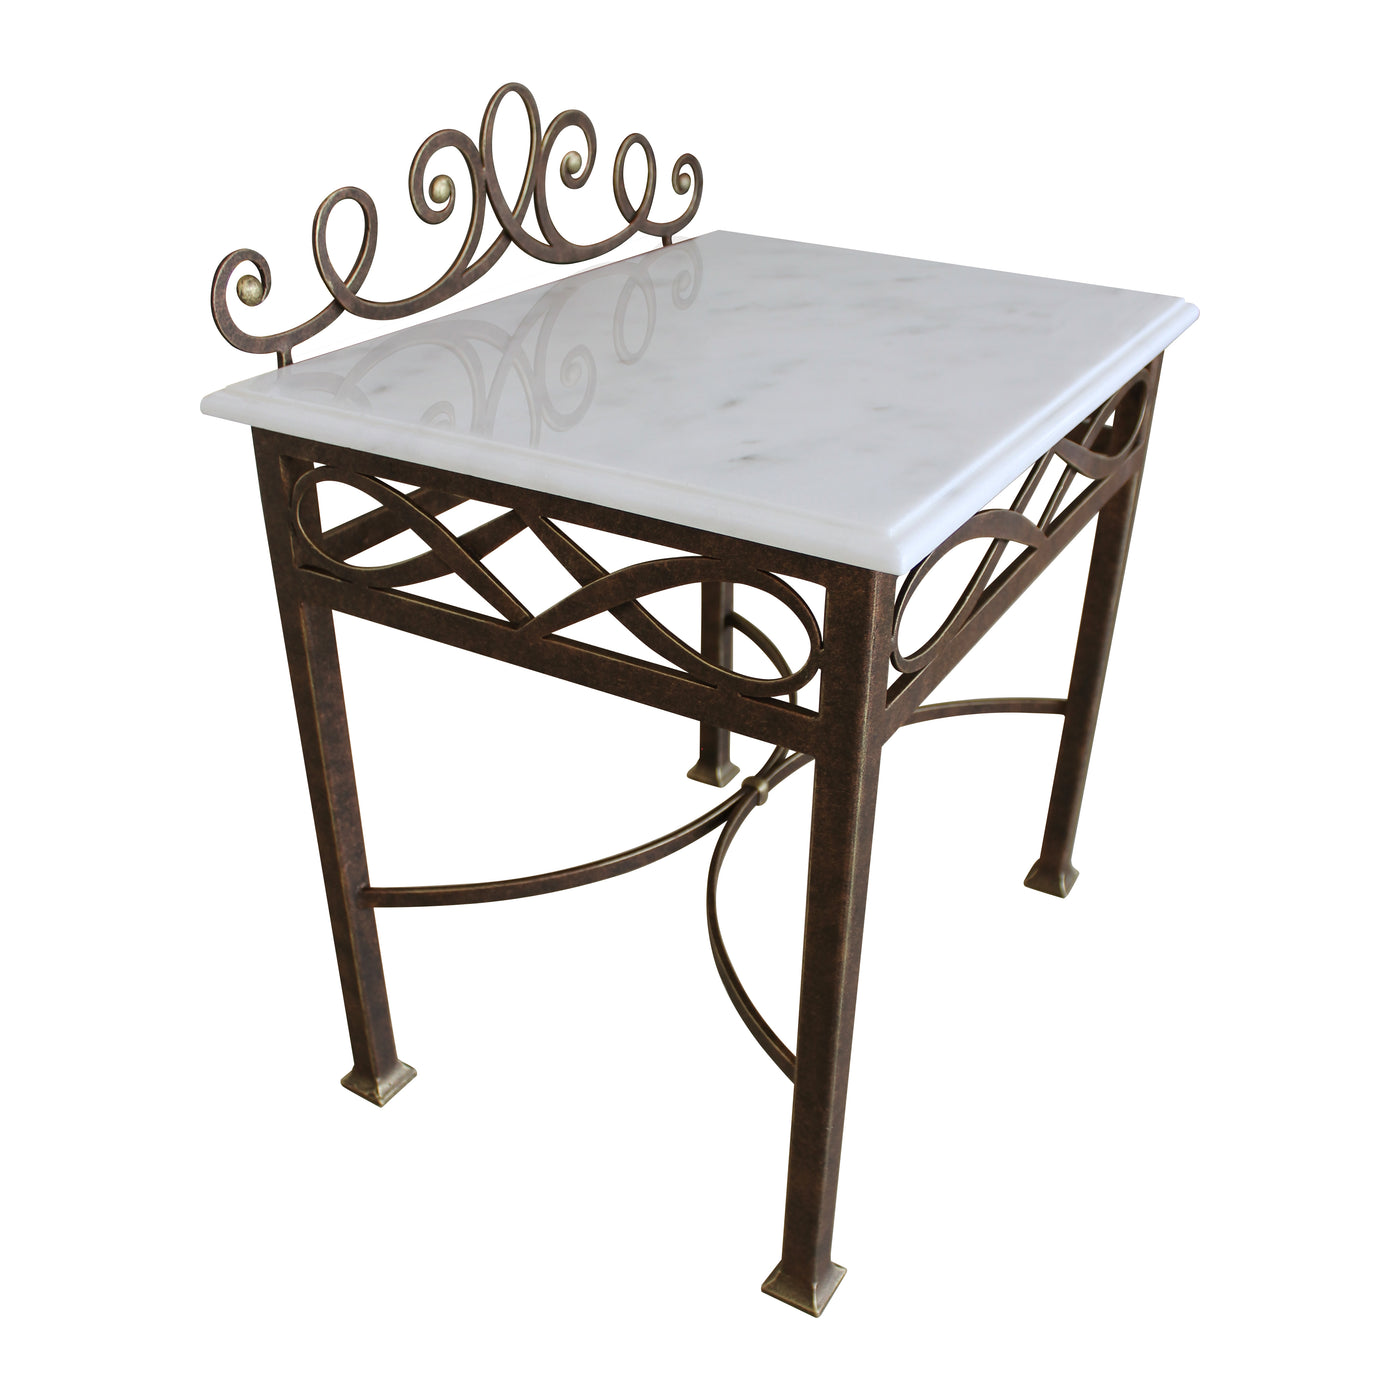 A stylish organic night table painted in antique bronze and topped with white marble